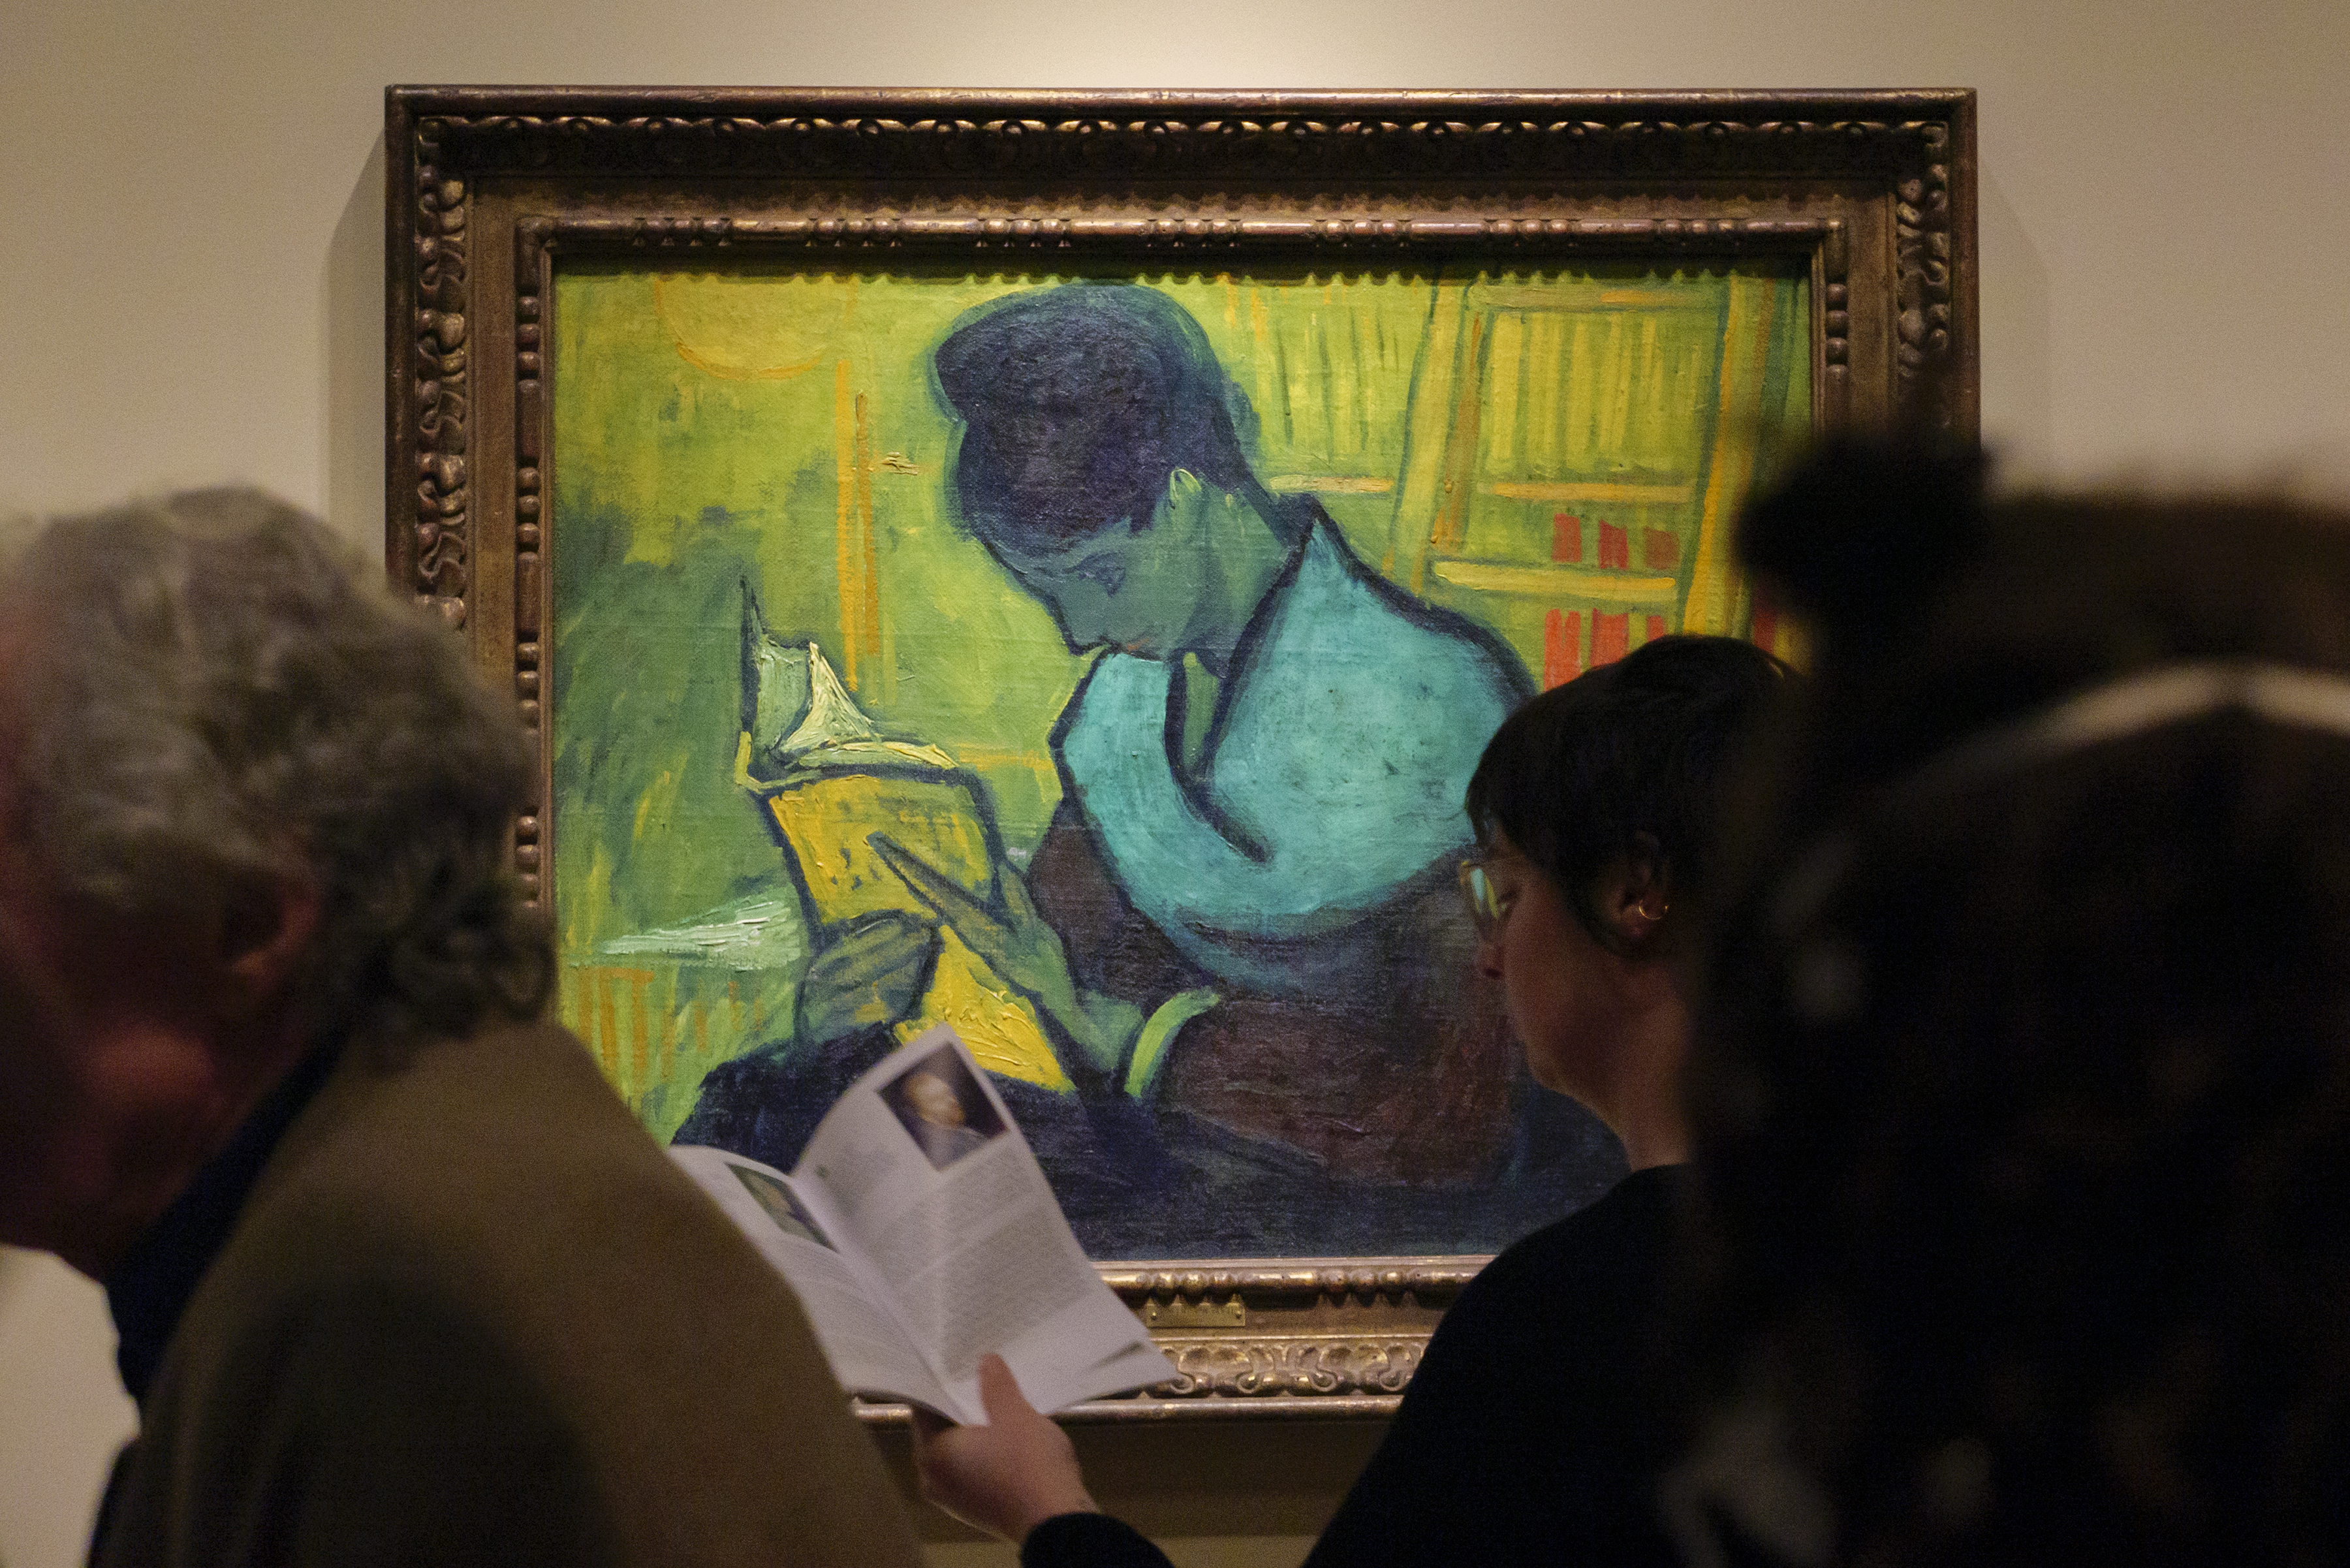 Visitors walk past a Van Gogh painting "The novel reader" in the Van Gogh in America exhibition at the Detroit Institute of Art on January 11, 2023 in Detroit.  (Andy Morrison/Detroit News via AP)